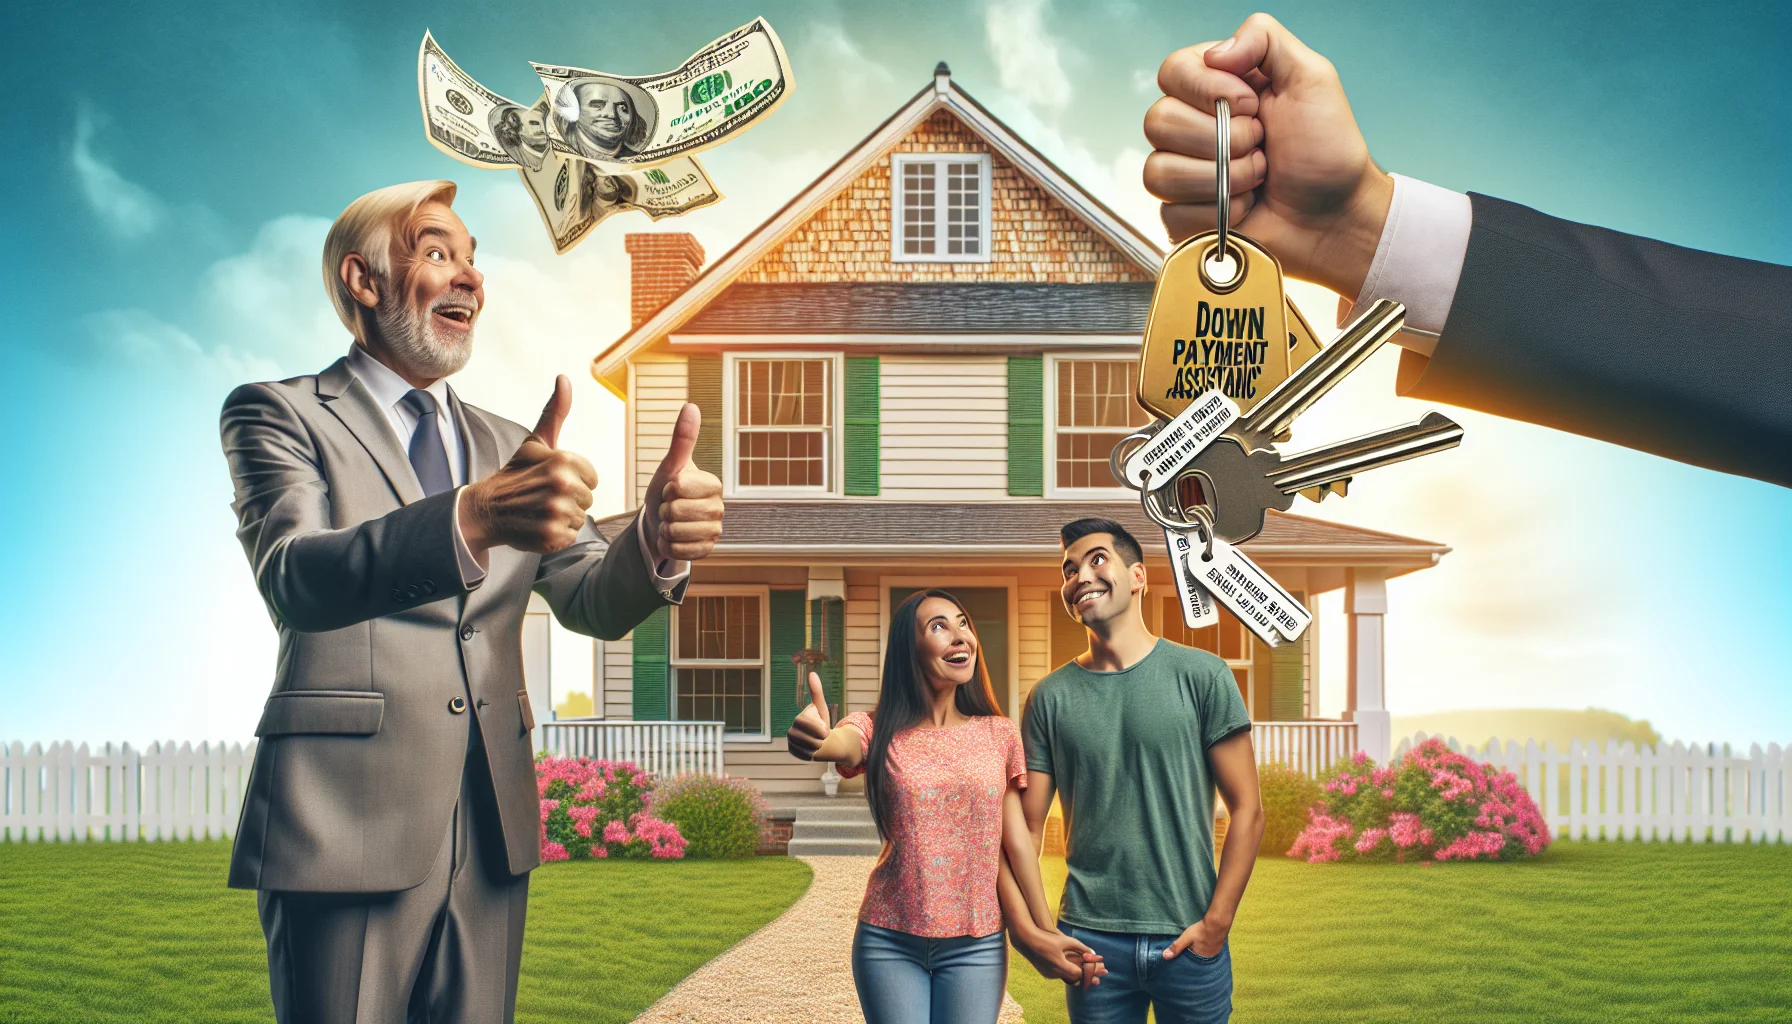 Create a humorous and realistic scene vividly illustrating how down payment assistance works in the ideal scenario regarding real-estate. Imagine a cheerful middle-aged Caucasian male realtor handing over a big set of shiny golden keys to an ecstatic young Hispanic couple standing in front of their charming, new cottage-style house. The keychain attached has tags representing different down payment assistance programs. In background, a massive thumbs up sign and a playful flying dollar bill with wings emphasizing the financial help received. Make sure the overall atmosphere is lively and colorful, reflecting the joy of owning a new home.